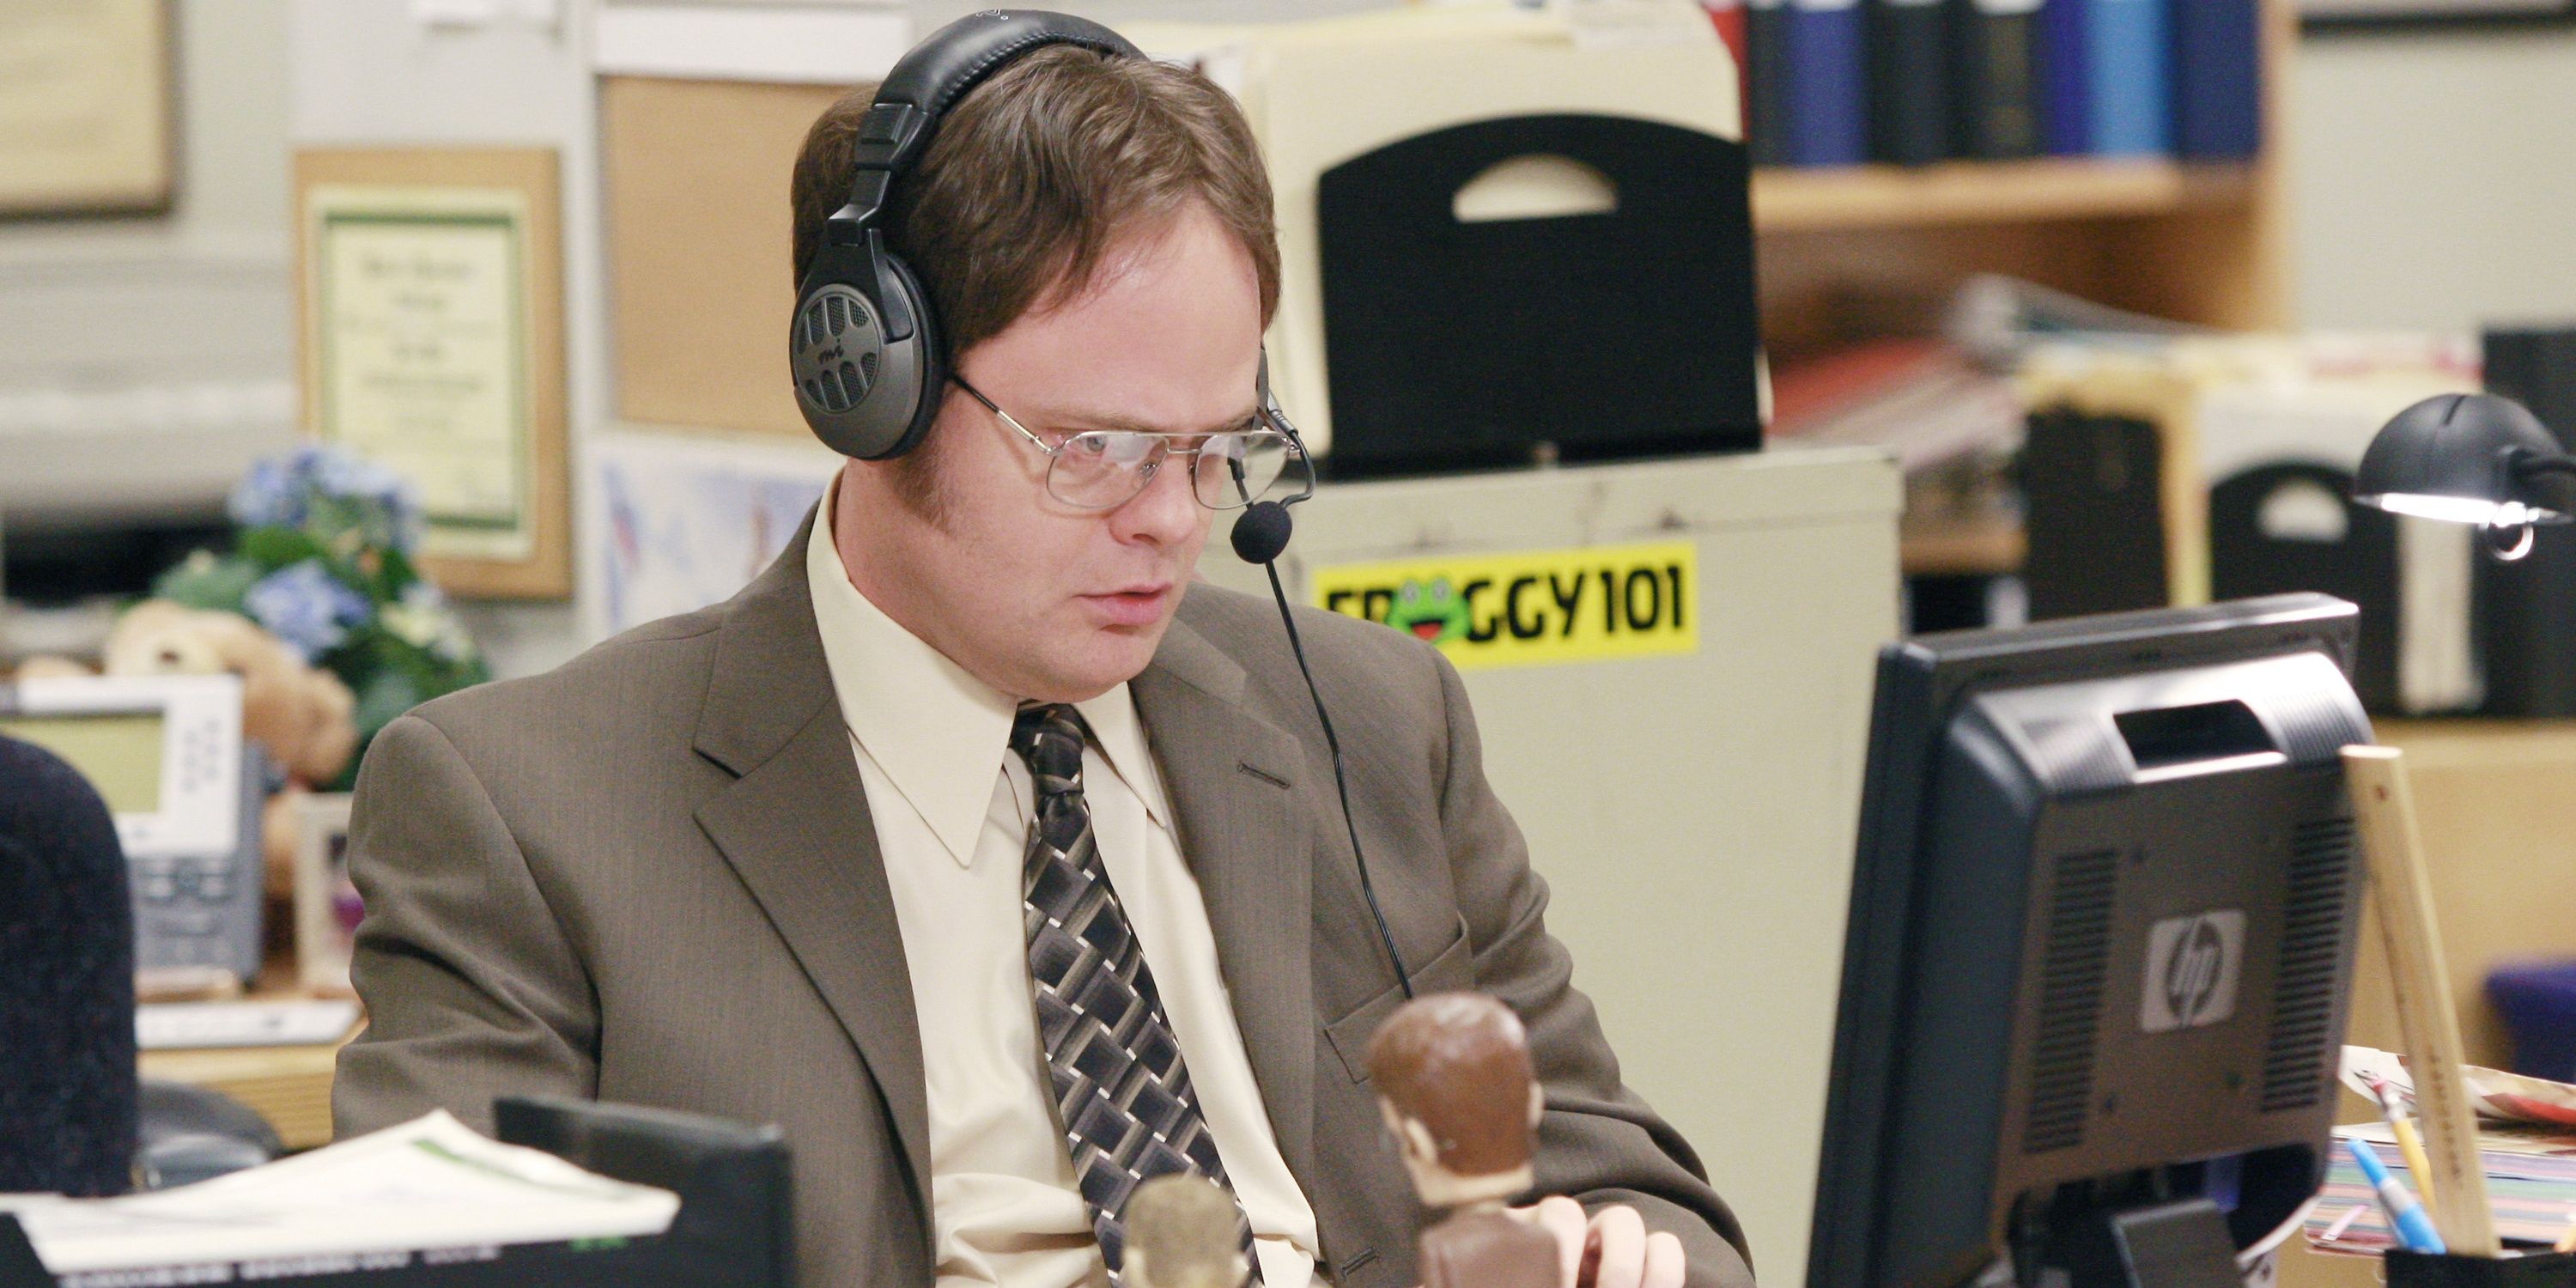 Dwight works at his computer in The Office